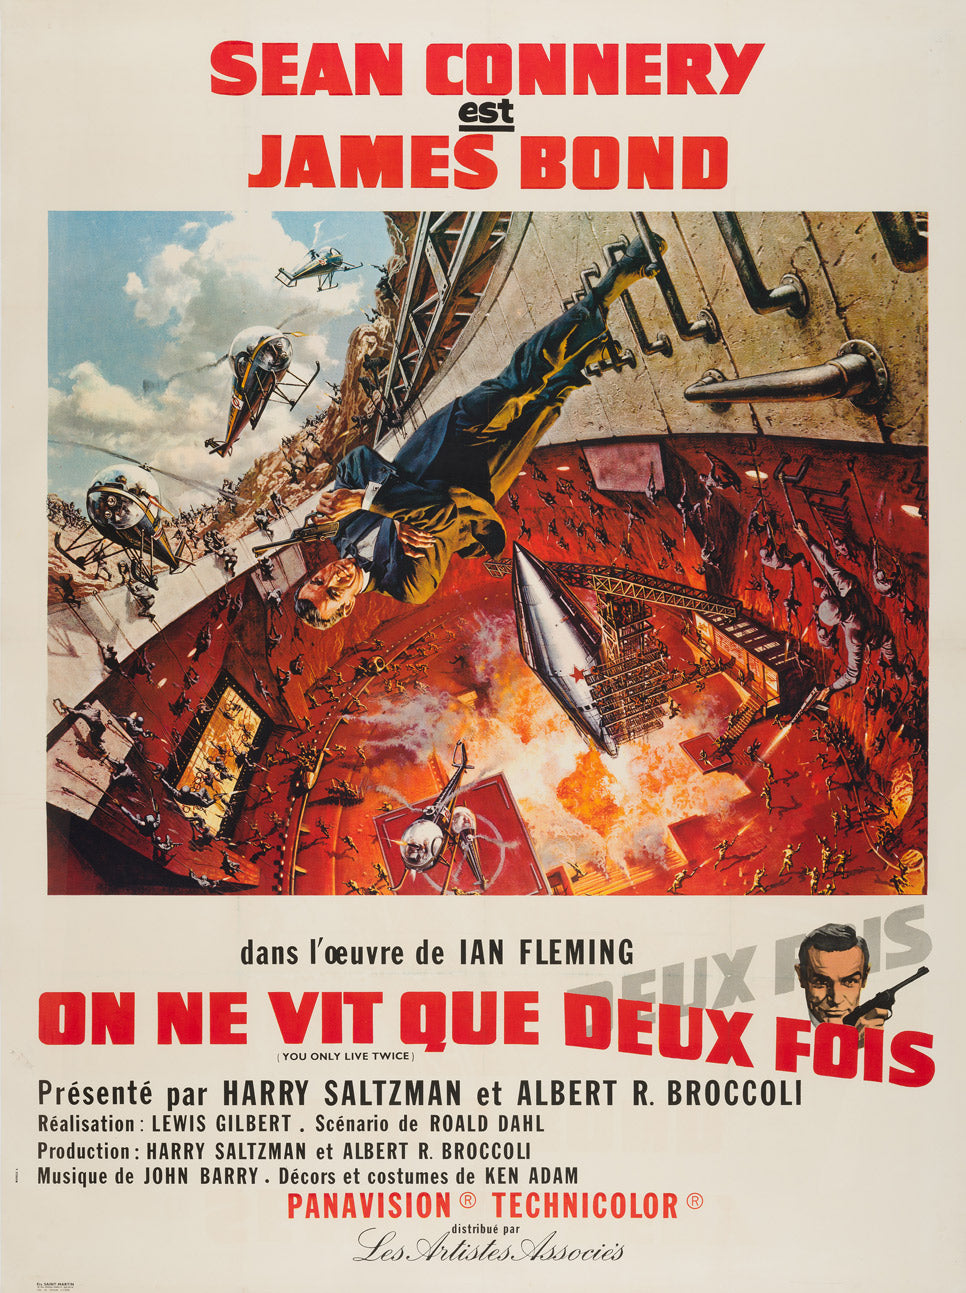 You-Only-Live-Twice-1967-French-Grande-Film-Movie-Poster.jpg?v=1571438568